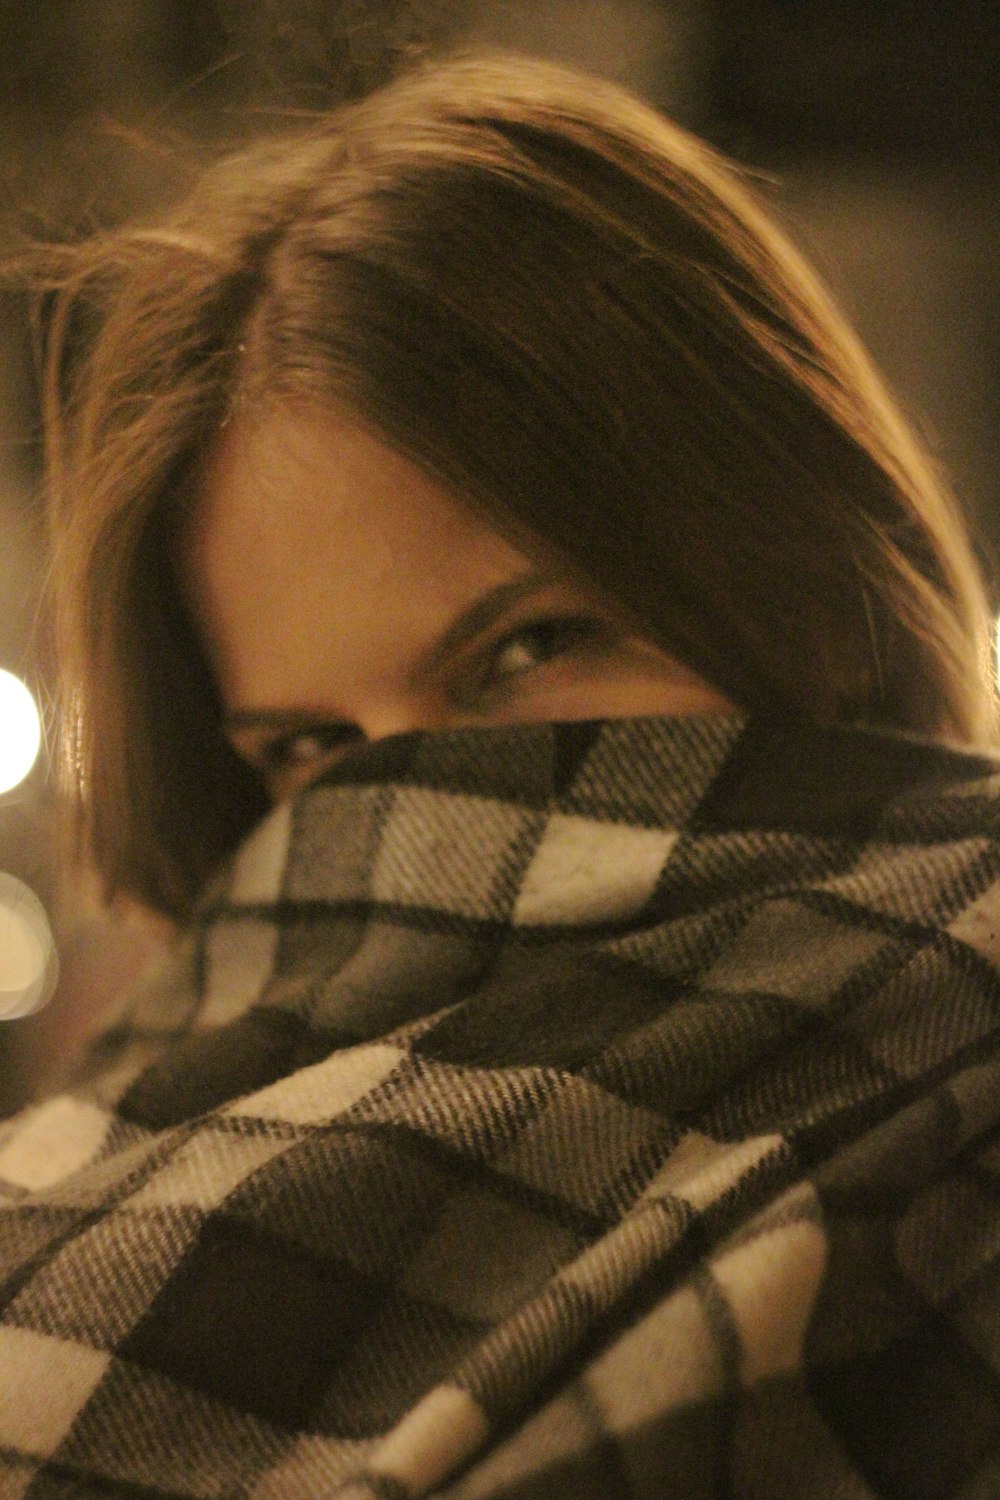 a close up of a person wrapped in a blanket